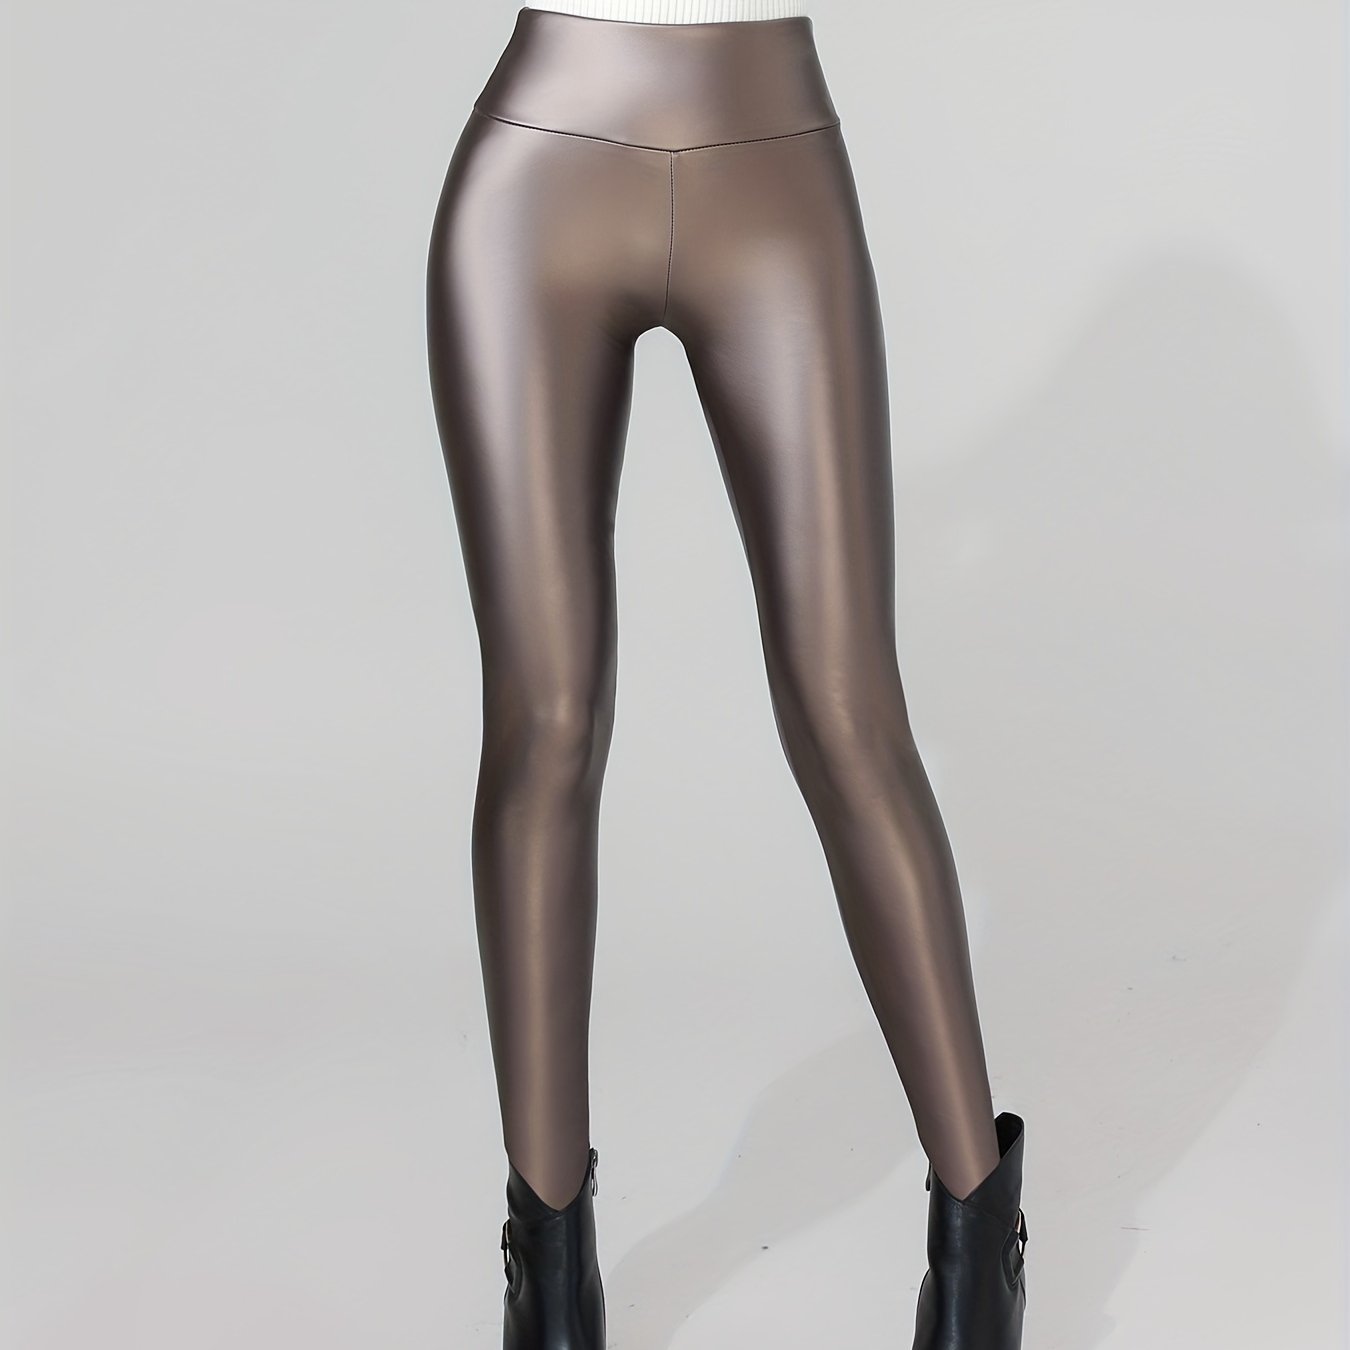 Taqqpue Shiny Sequin Leggings for Women Faux Leather Leggings